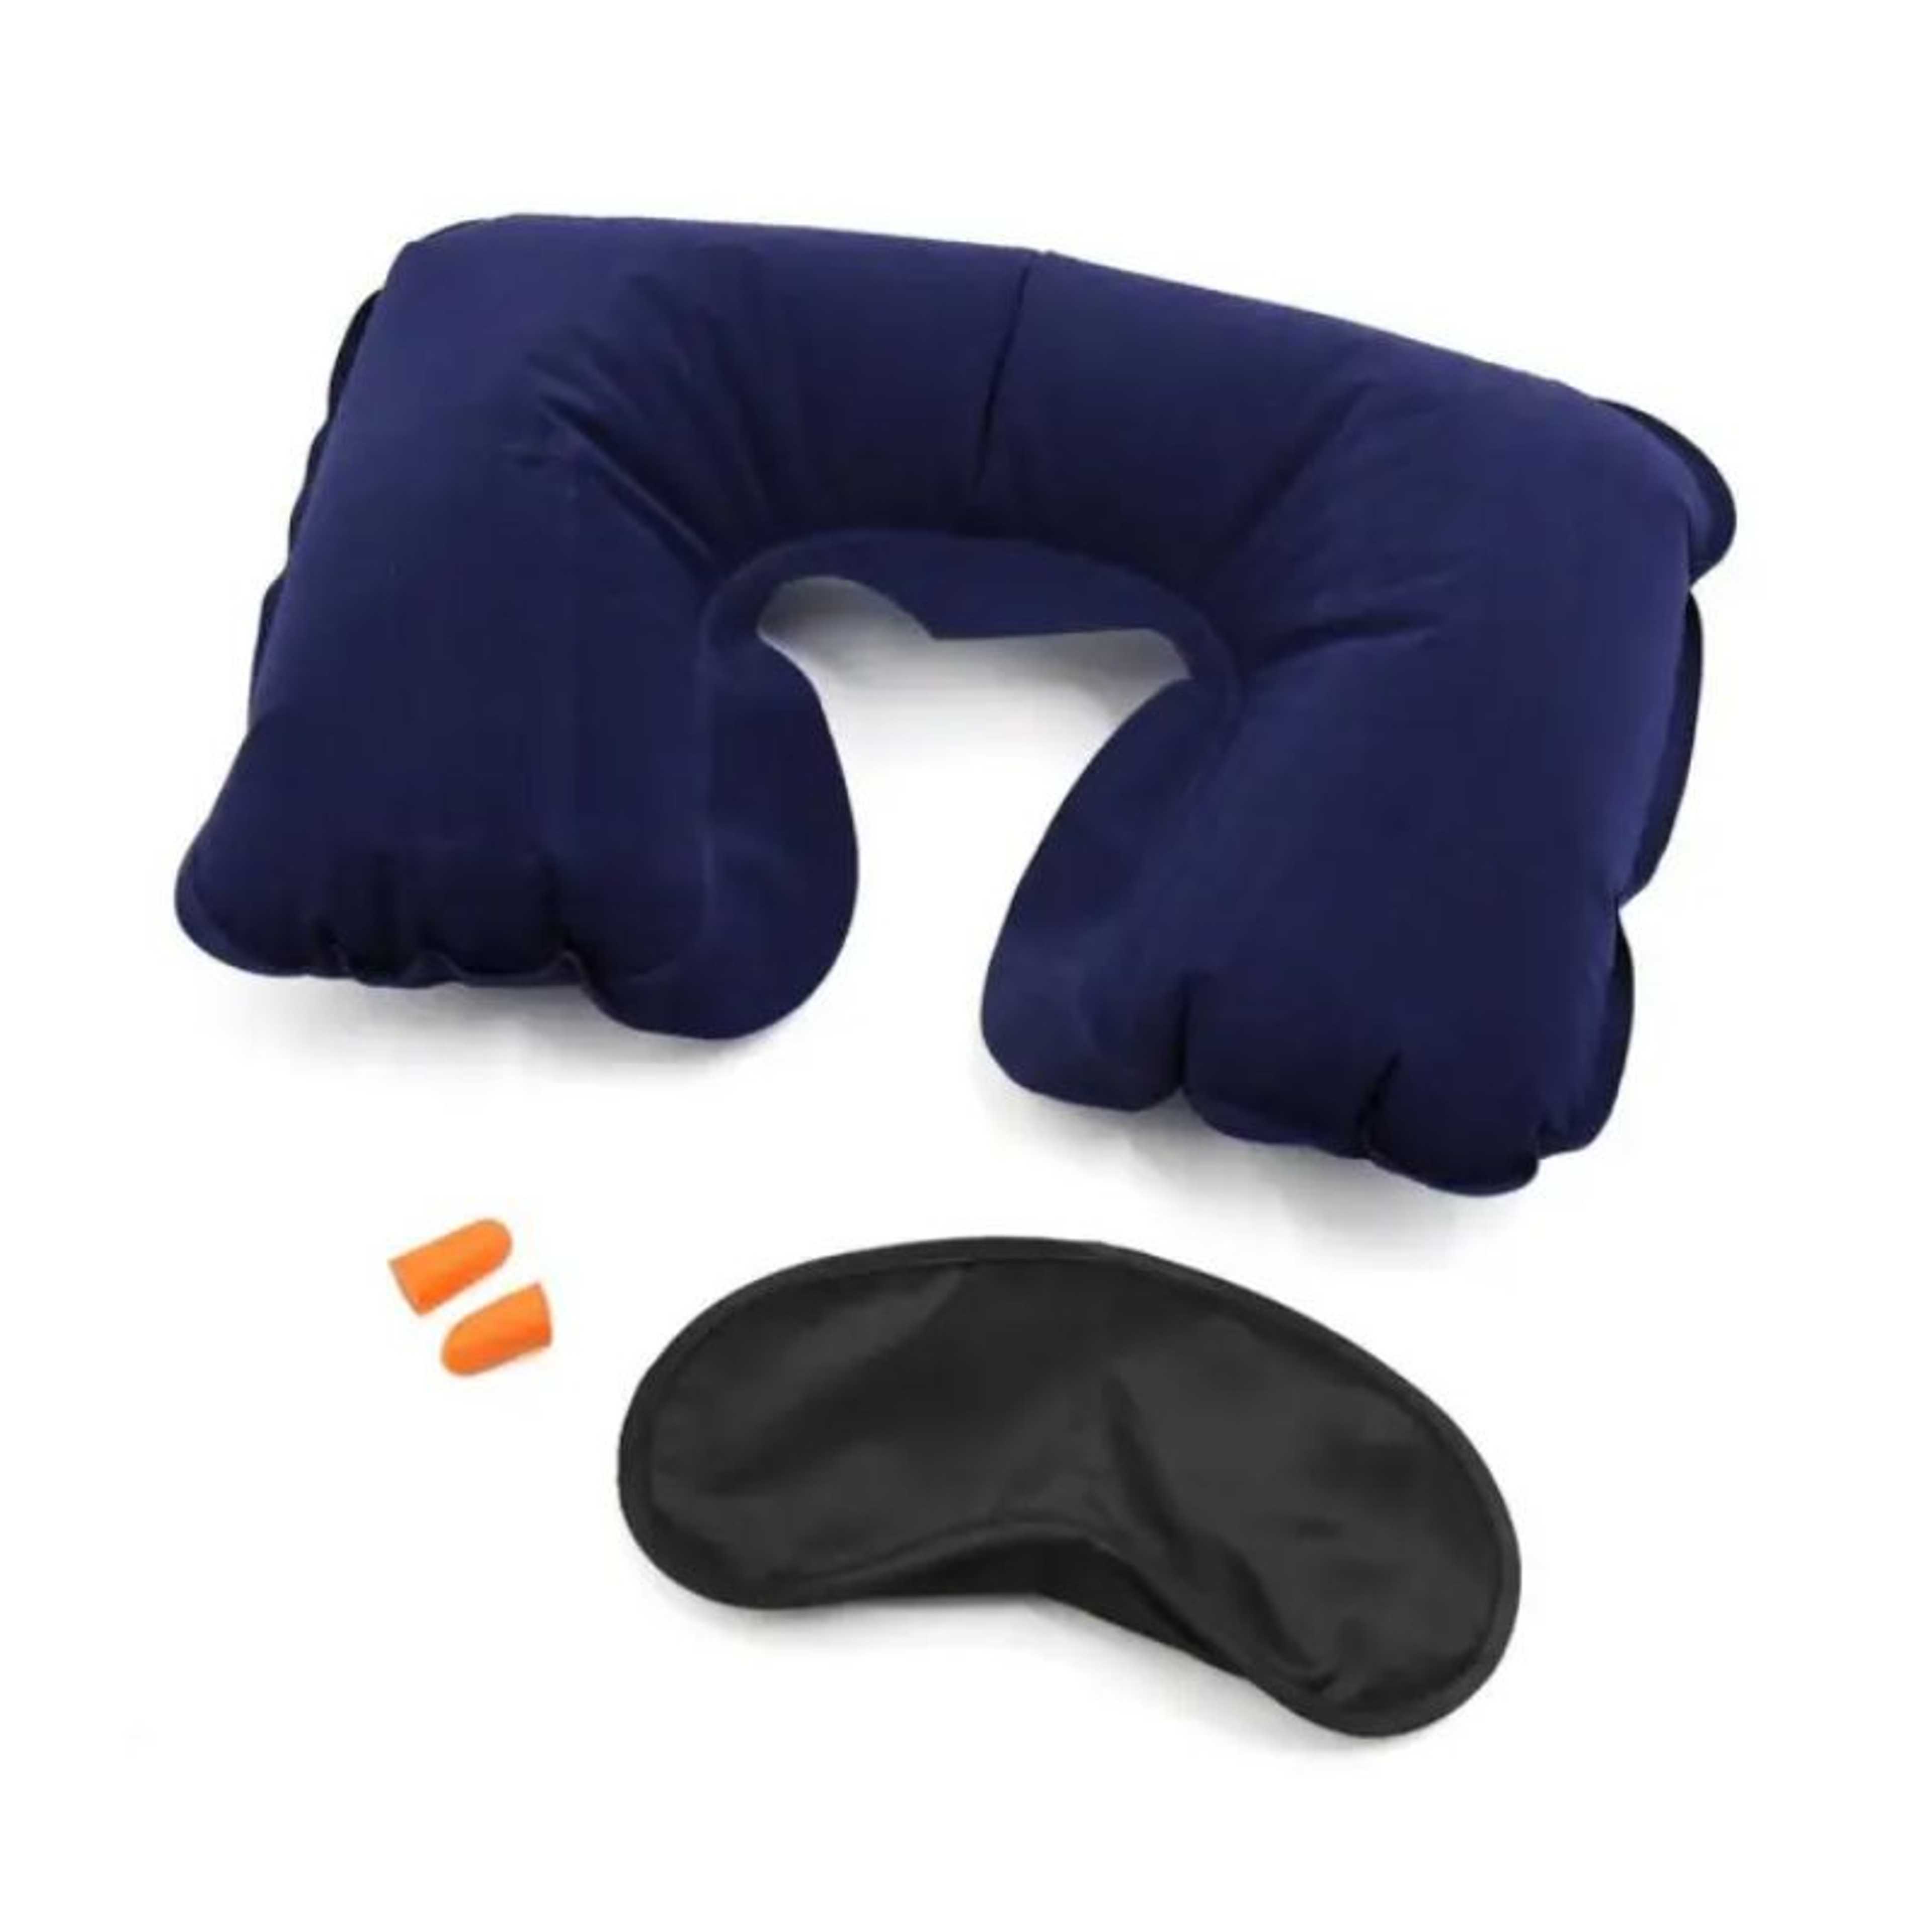 3 in 1 Travel Accessories Three Tourists Treasures Travelling Neck Pillow Earplug Blinder set